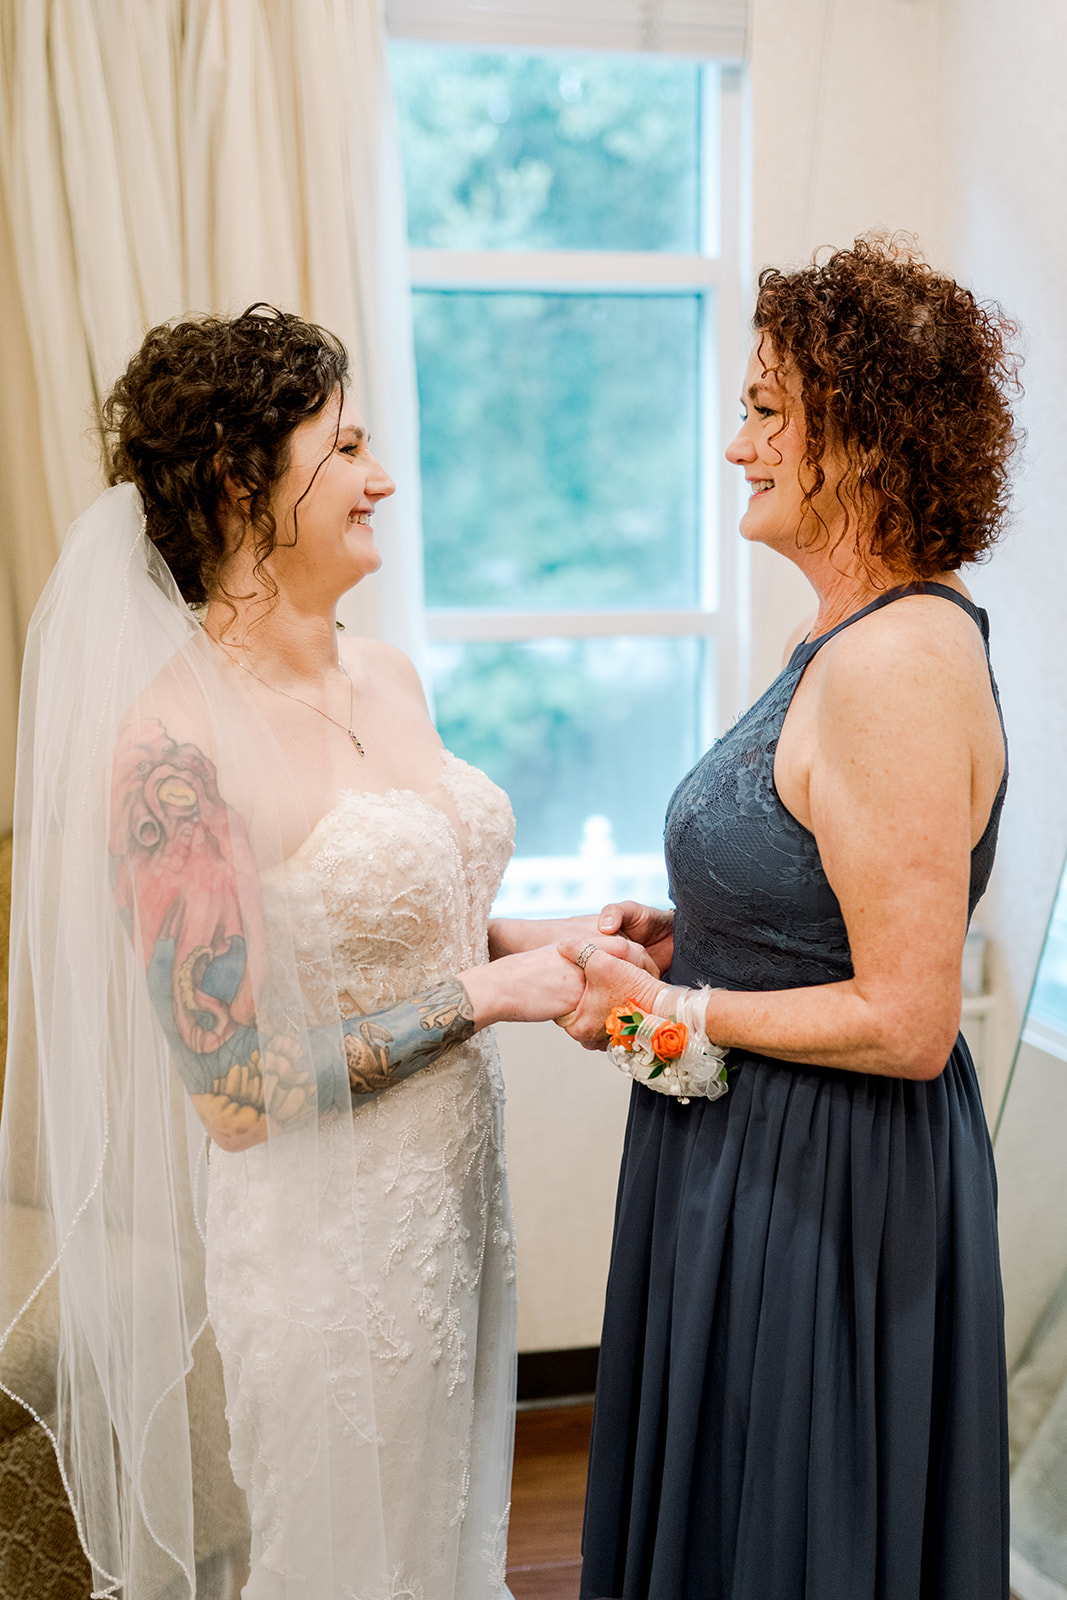 Mother and daughter holding hands in front of window on wedding day